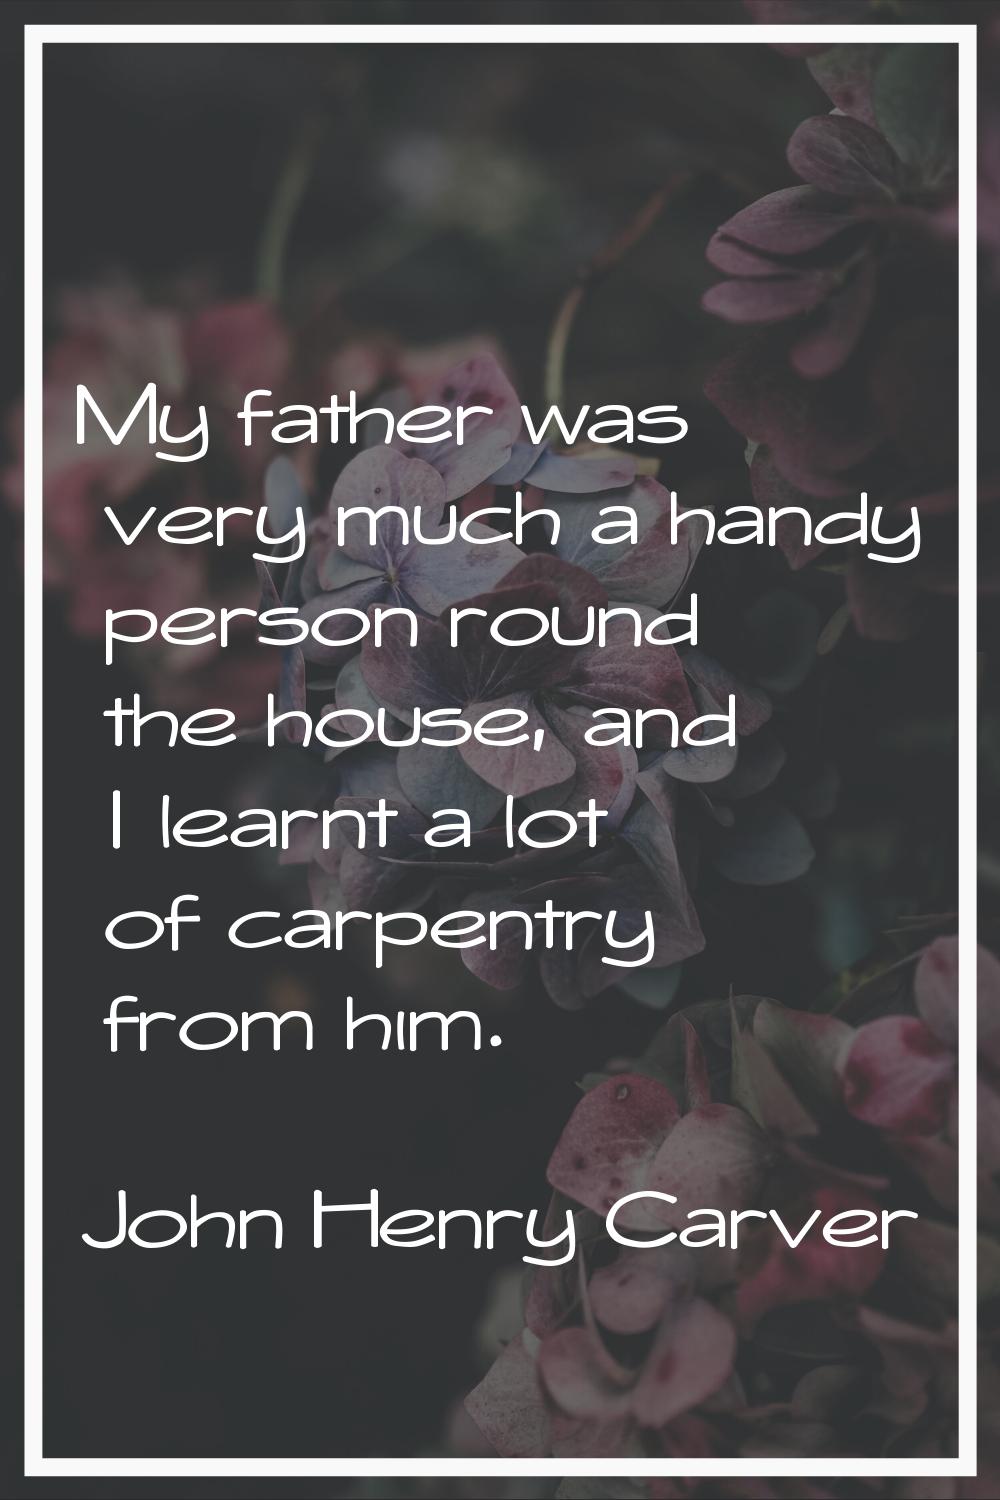 My father was very much a handy person round the house, and I learnt a lot of carpentry from him.